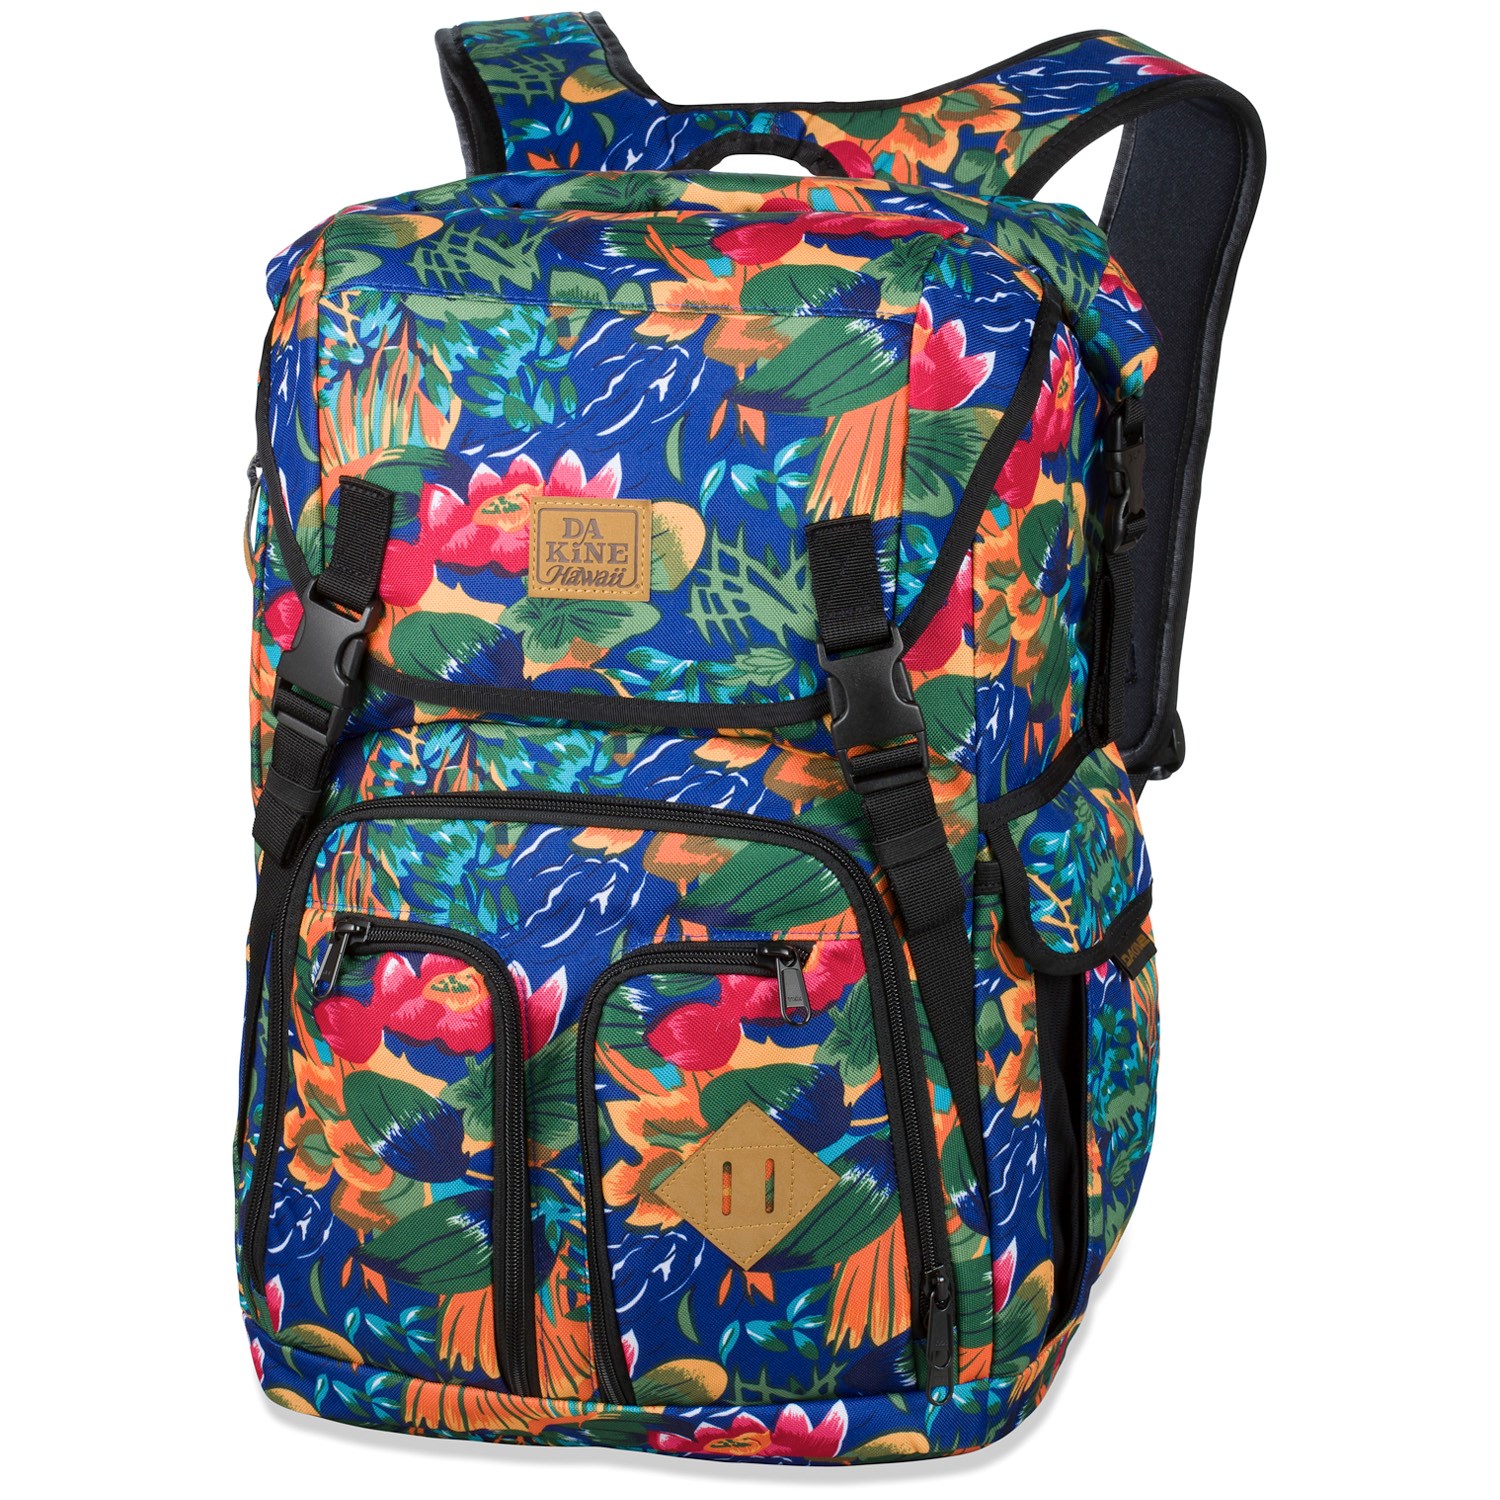 DaKine Jetty 32L Wet/Dry Backpack | evo outlet